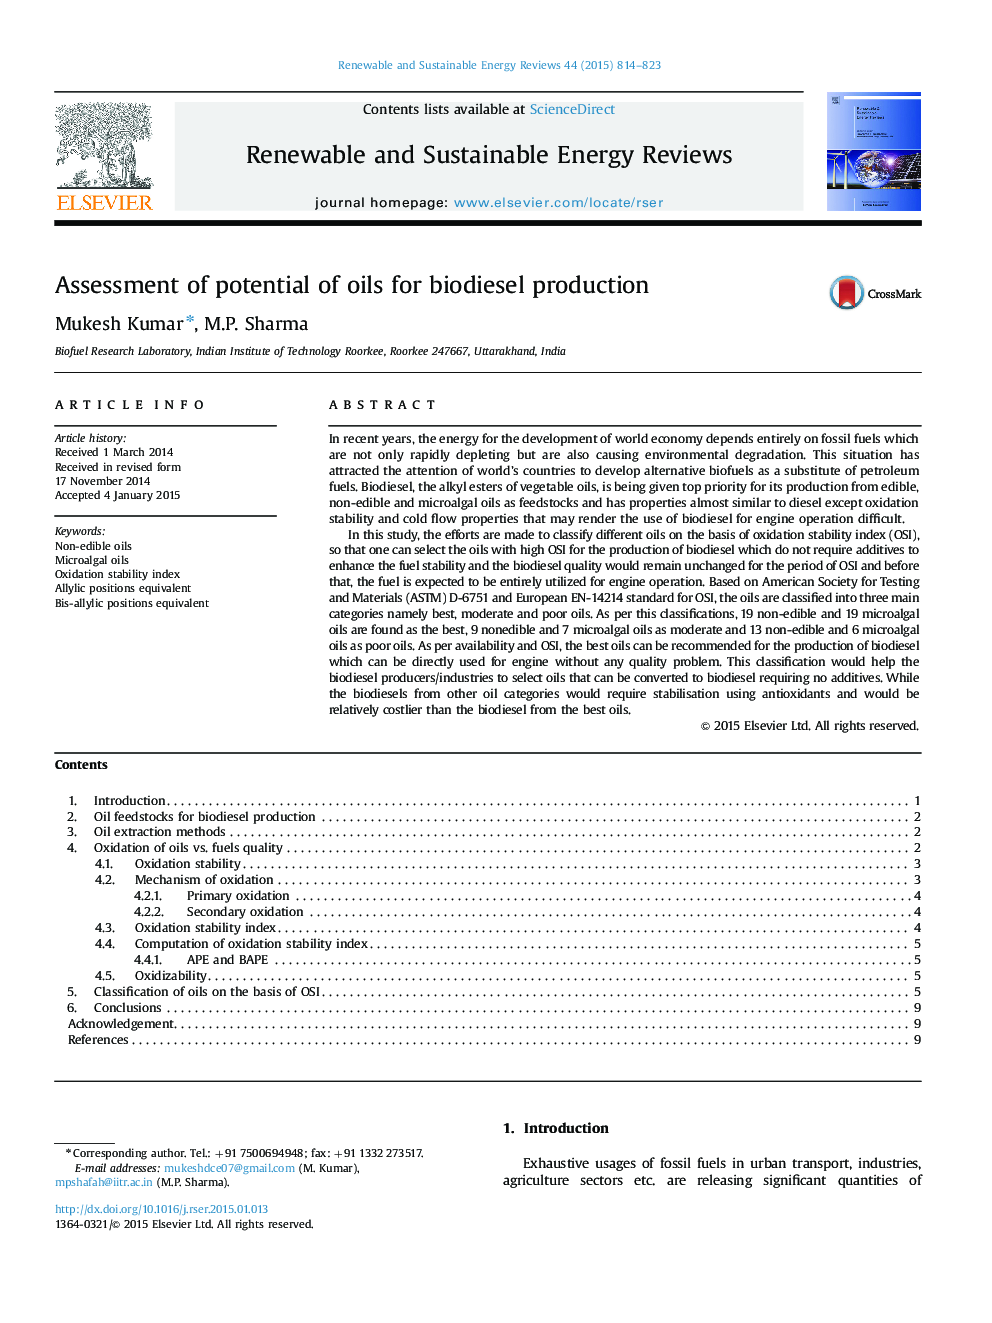 Assessment of potential of oils for biodiesel production